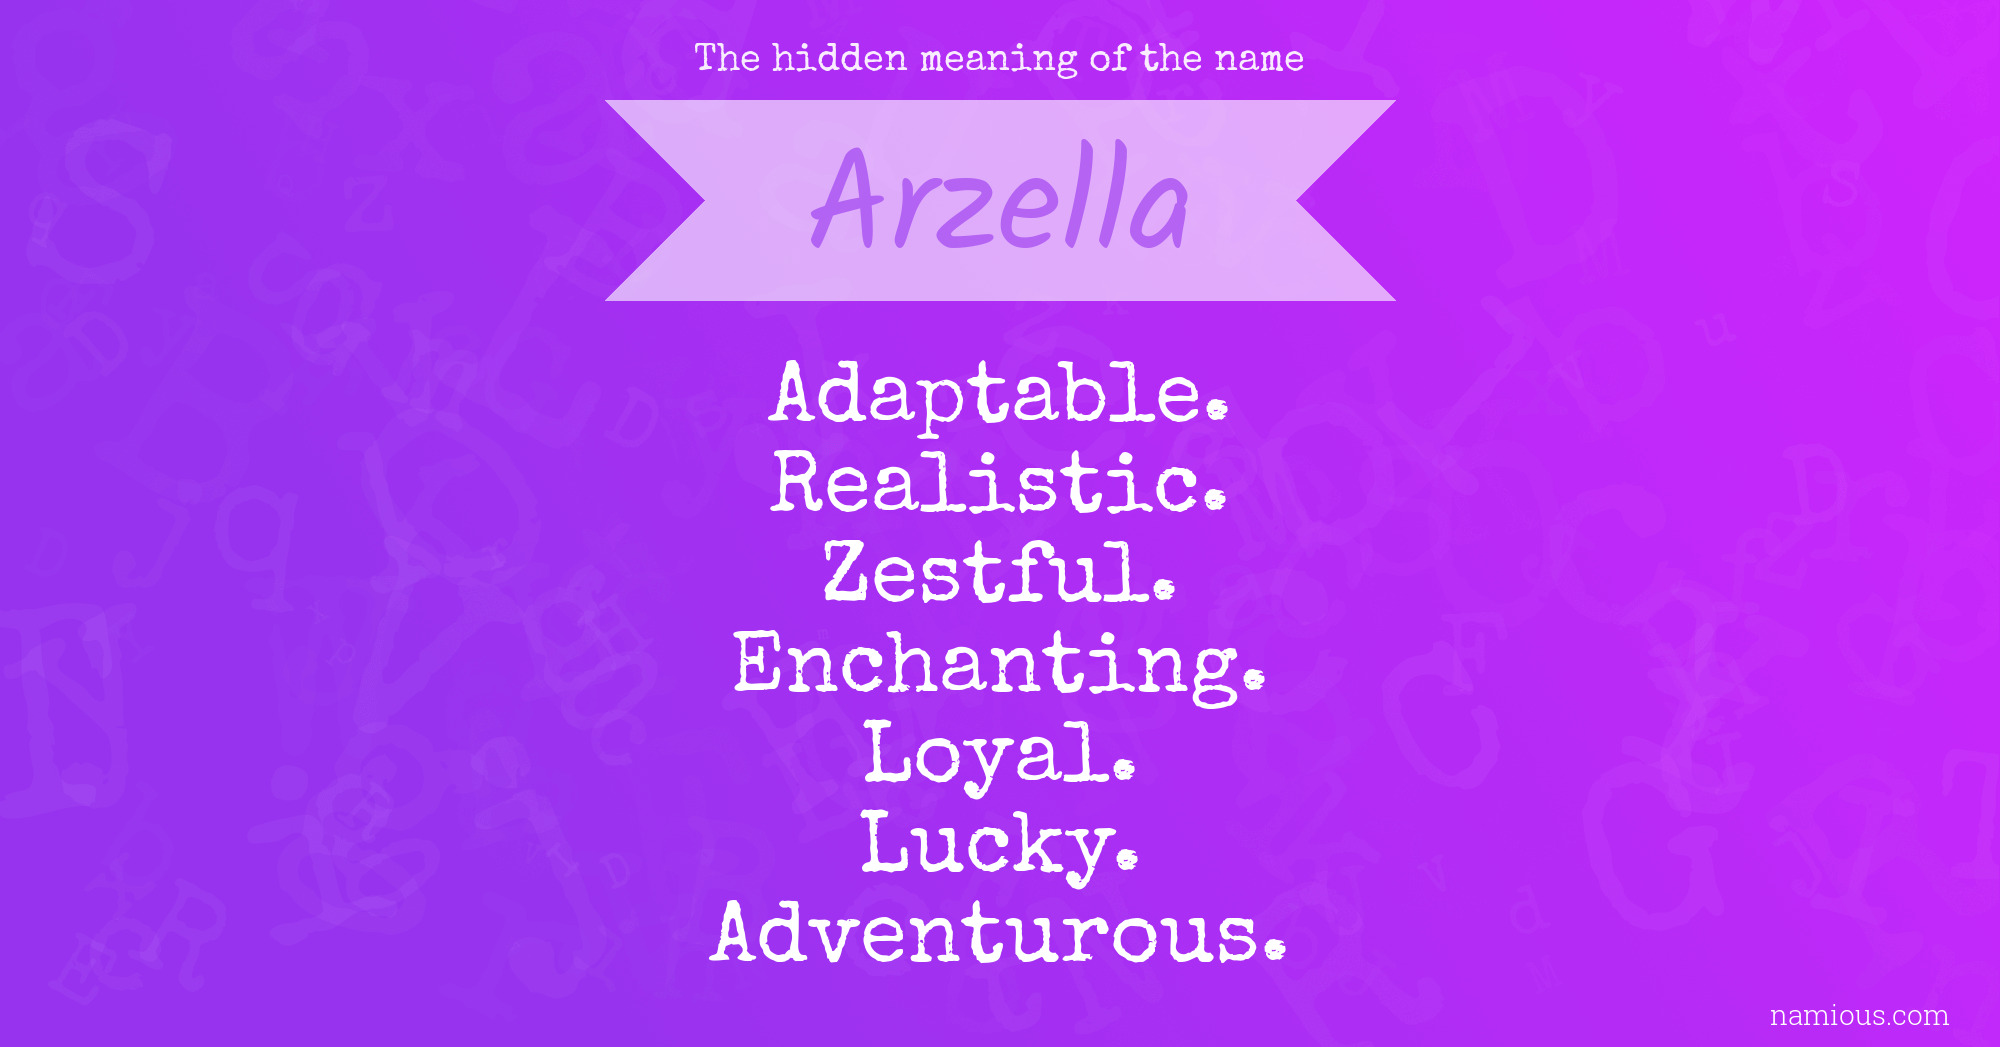 The hidden meaning of the name Arzella